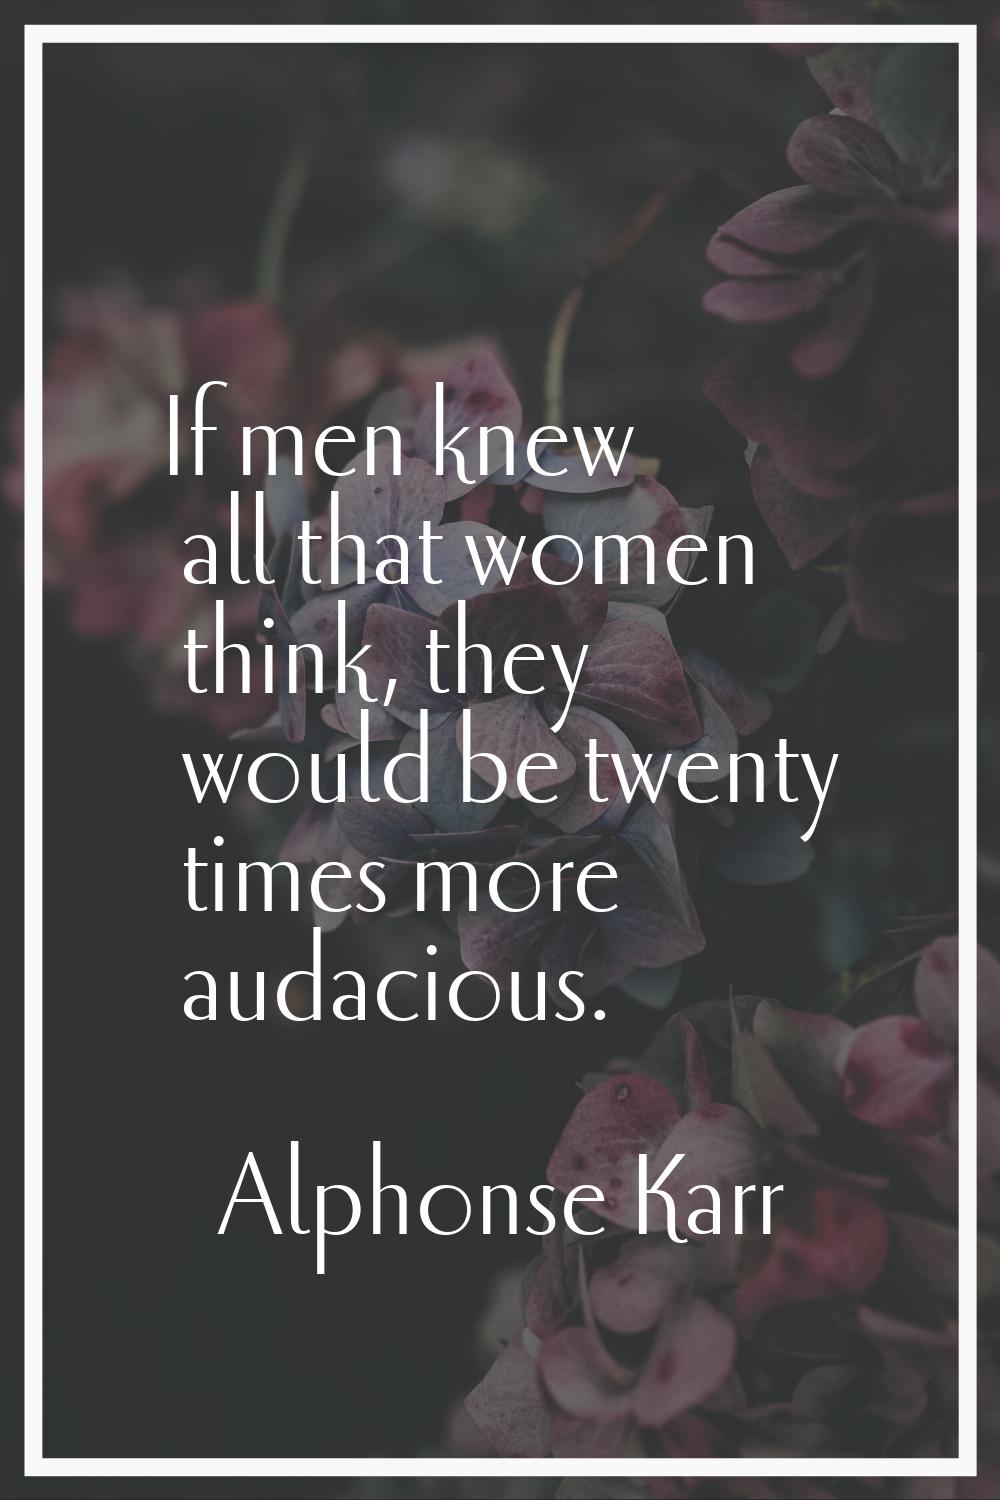 If men knew all that women think, they would be twenty times more audacious.